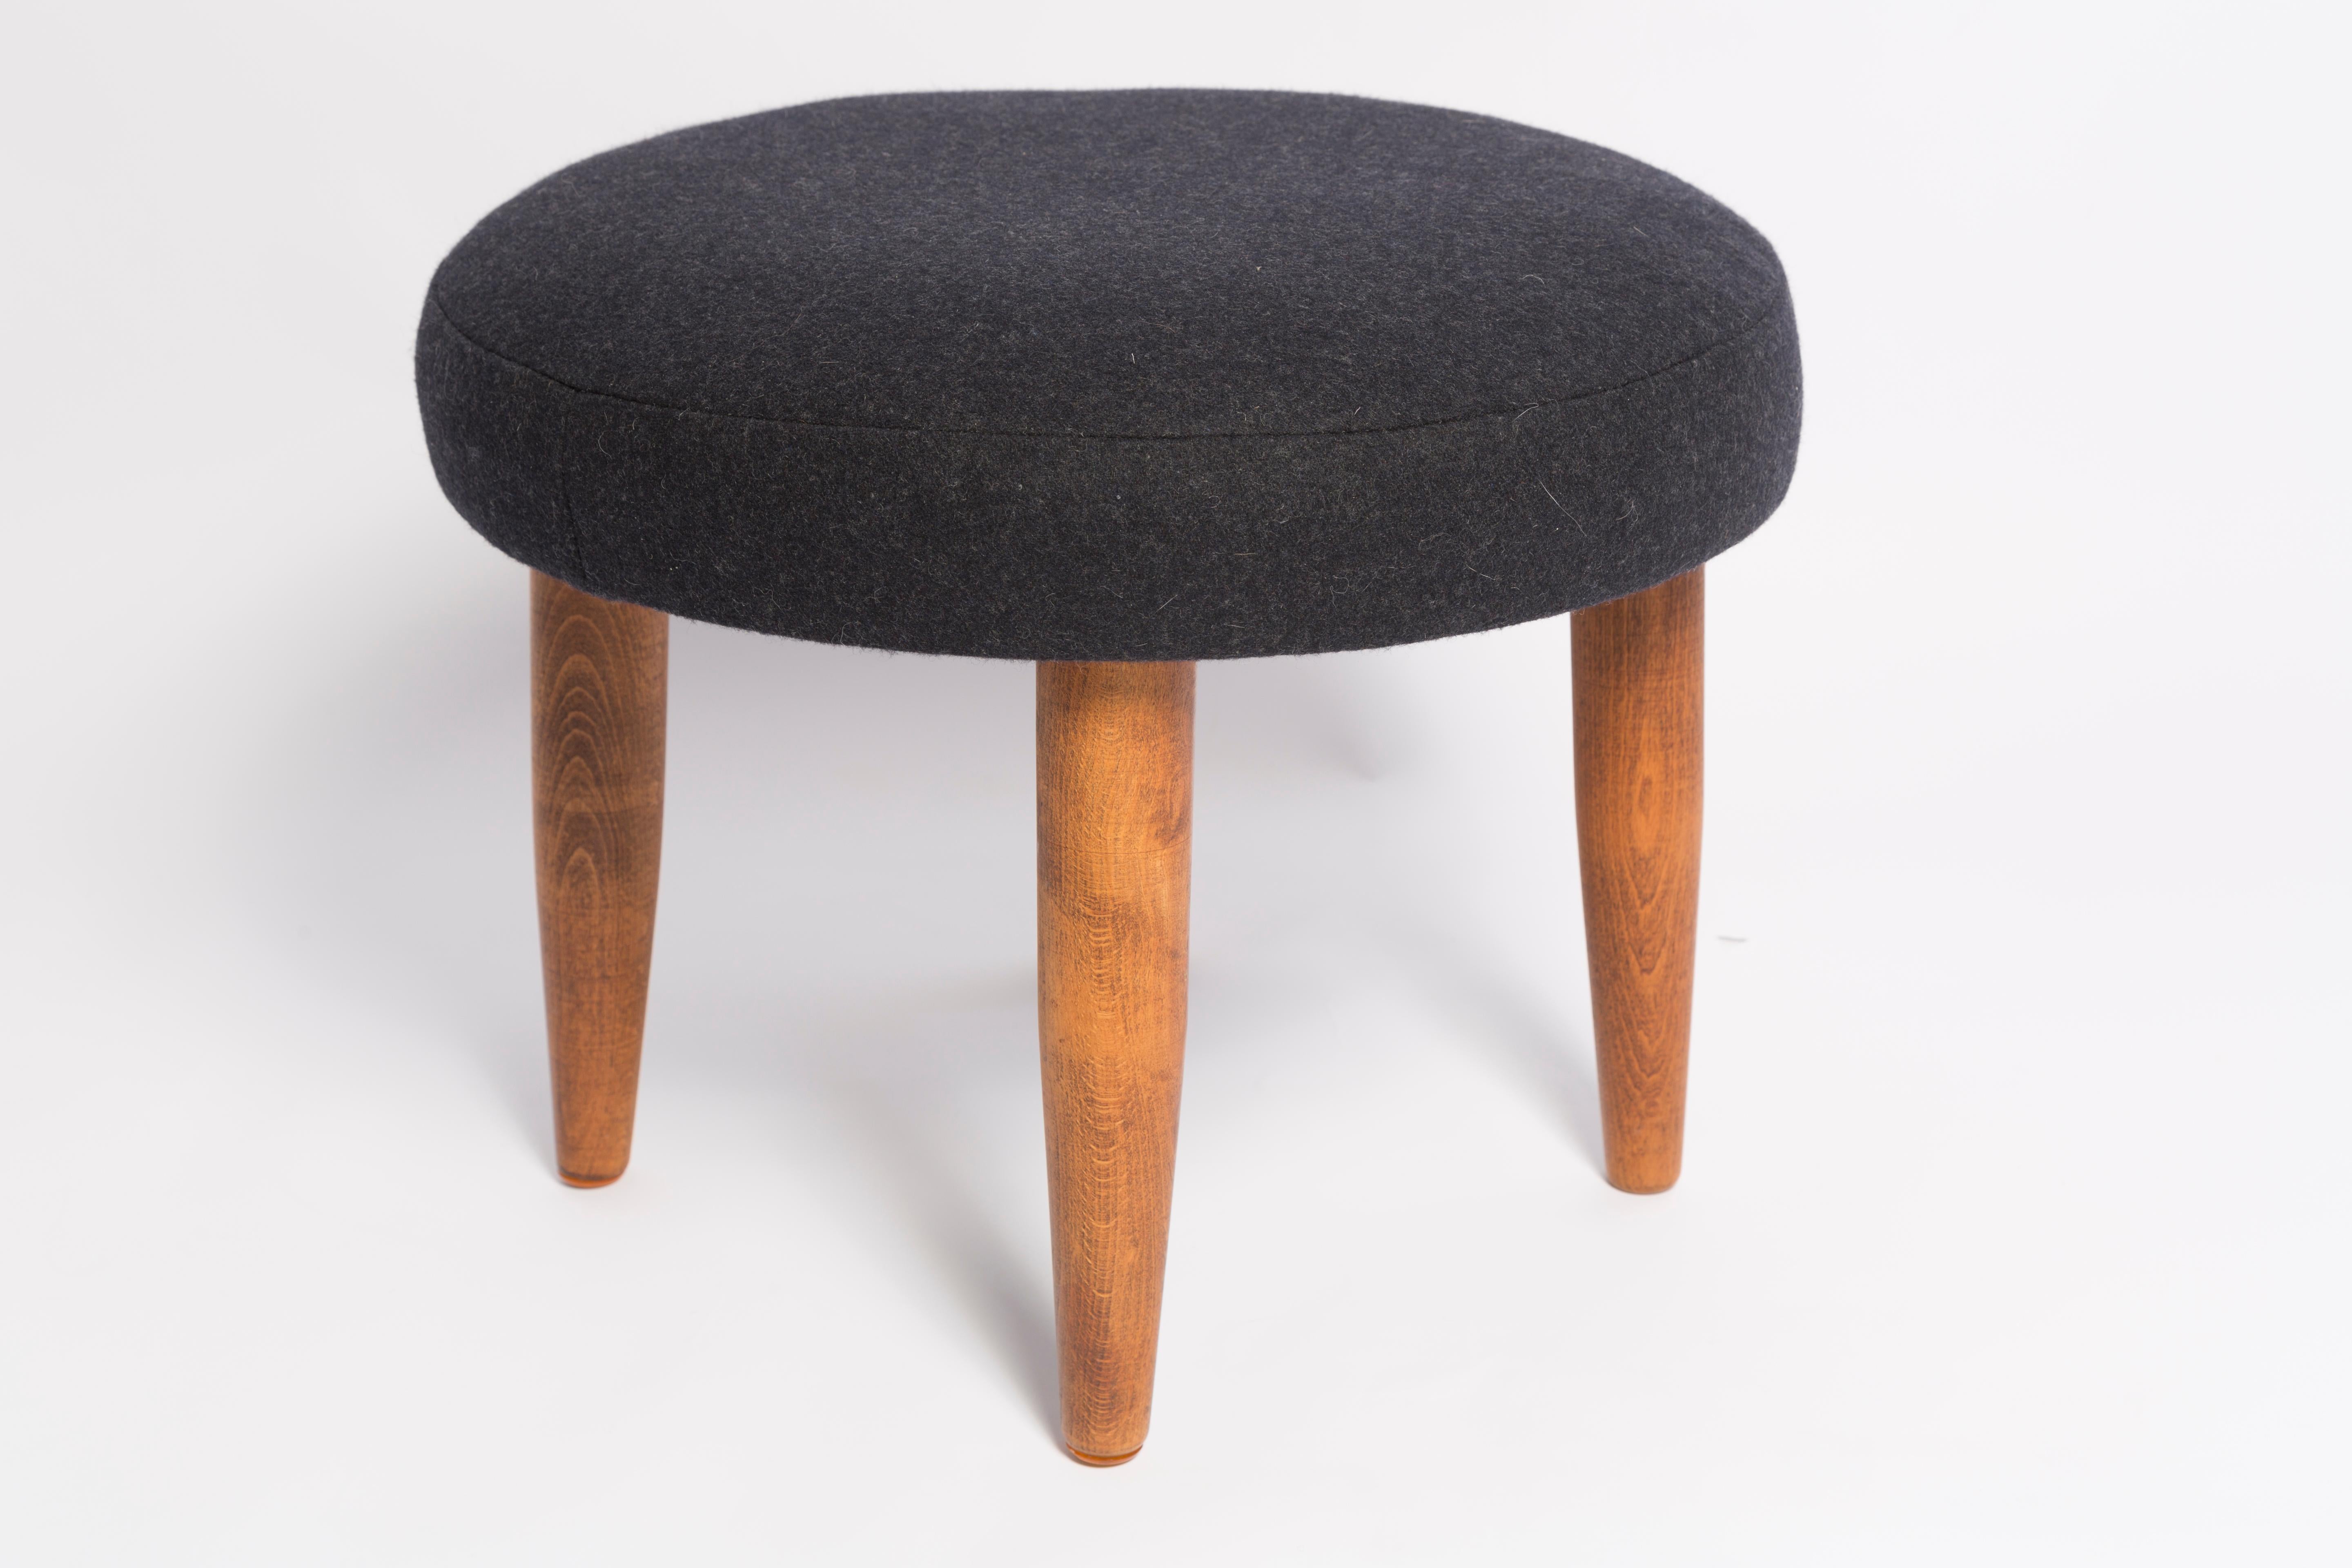 Stool from the turn of the 1960s. Beautiful black high quality faux leather. The stool consists of an upholstered part, a seat and wooden legs narrowing downwards, characteristic of the 1960s style. The stool is after full renovation.
Only one